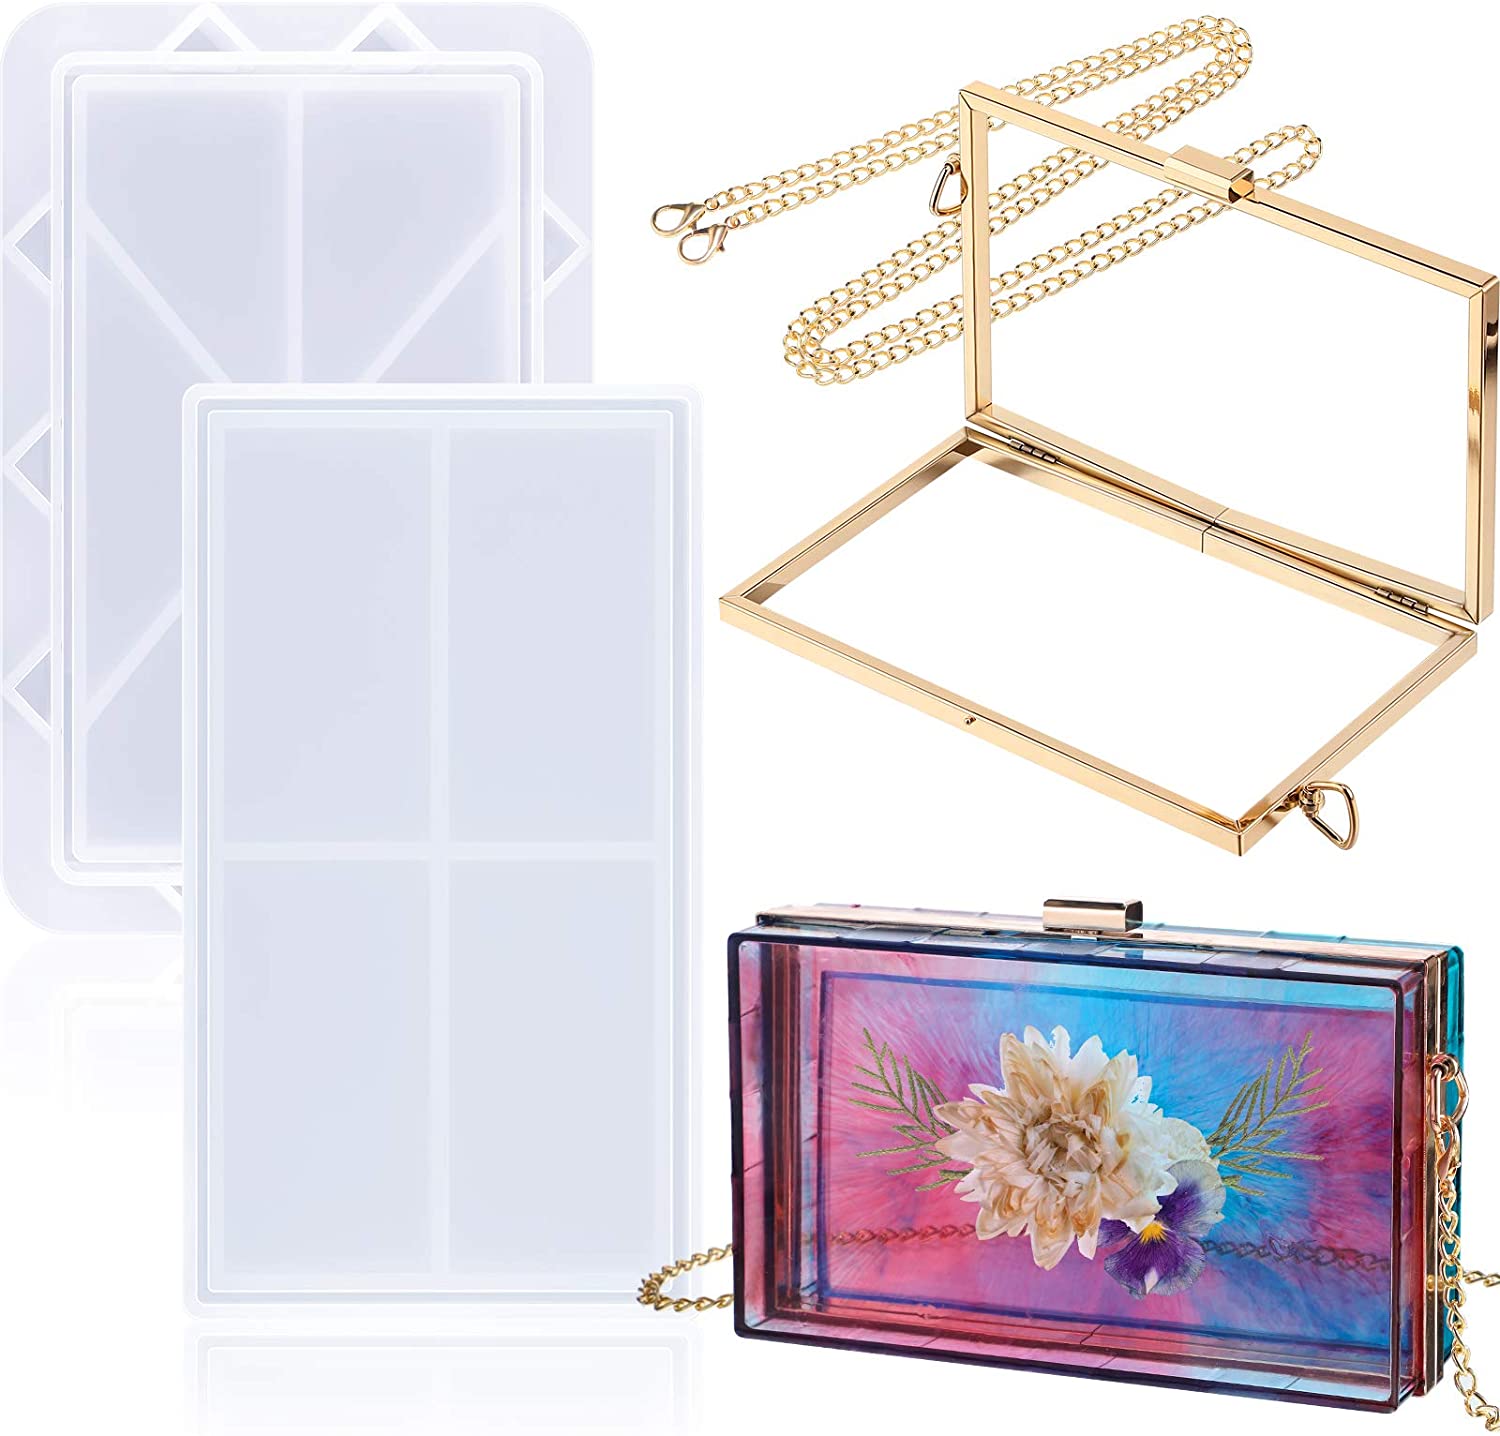 Minaudiere Box Clutch DIY Frame With Plastic Covers, Some With Handle  Guangzhou Supplier Gold Metal Obag Handles Purse Frames